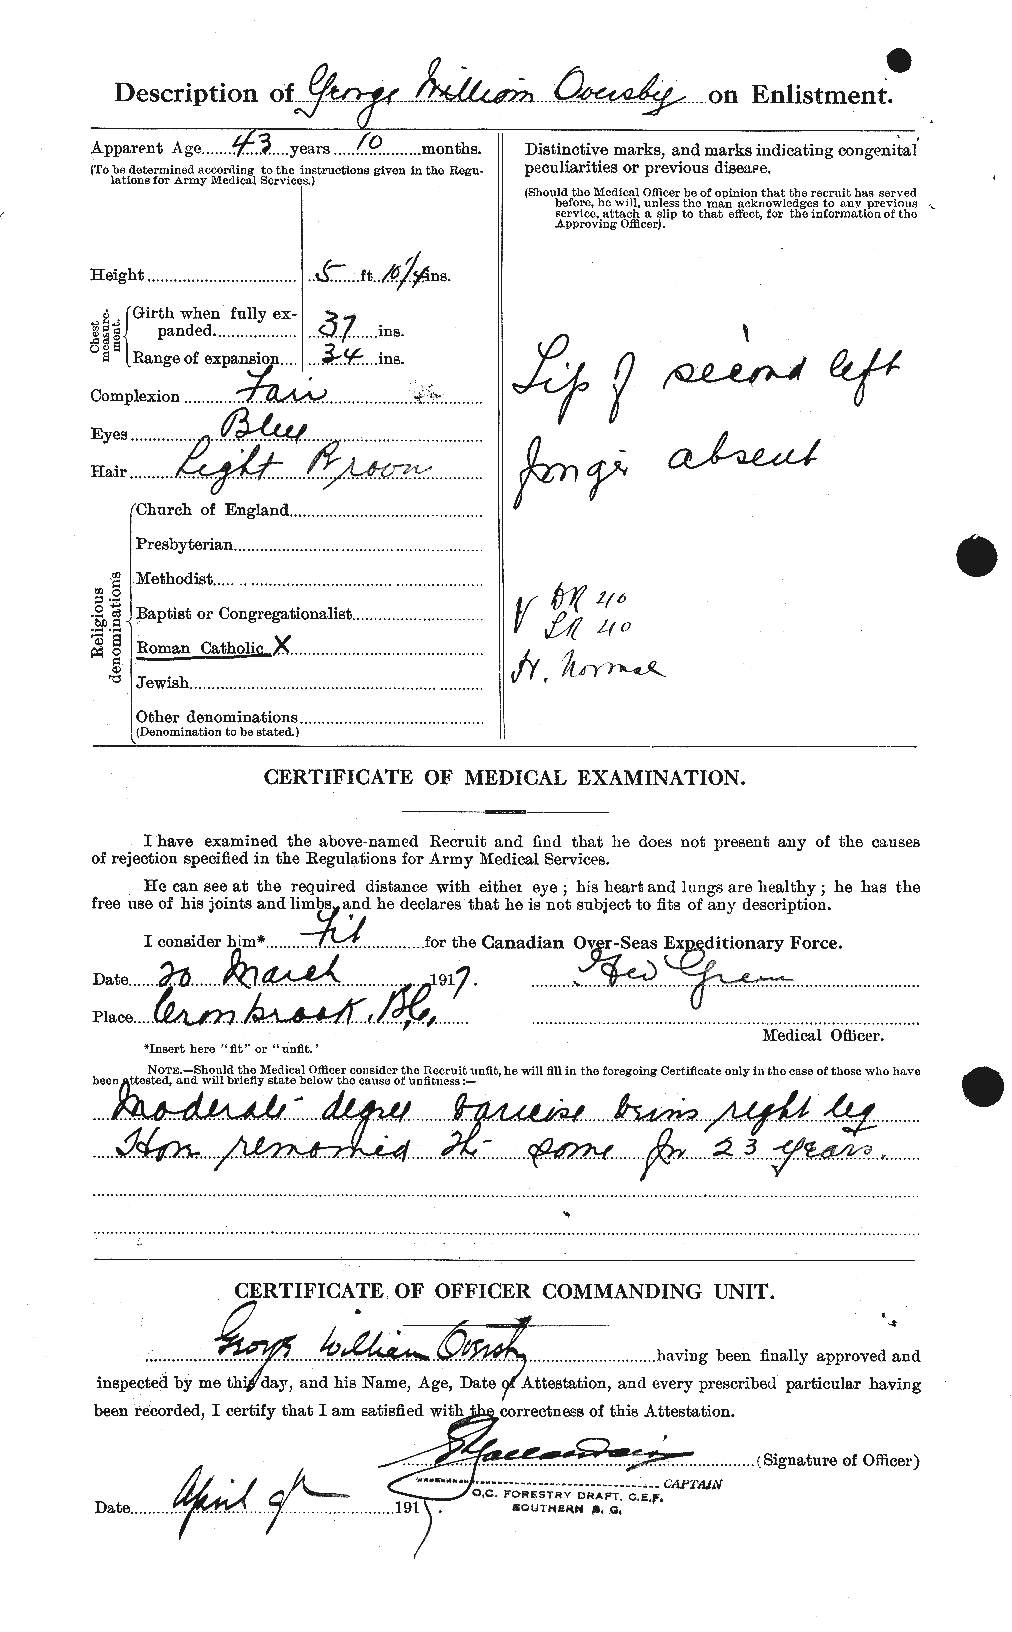 Personnel Records of the First World War - CEF 561131b